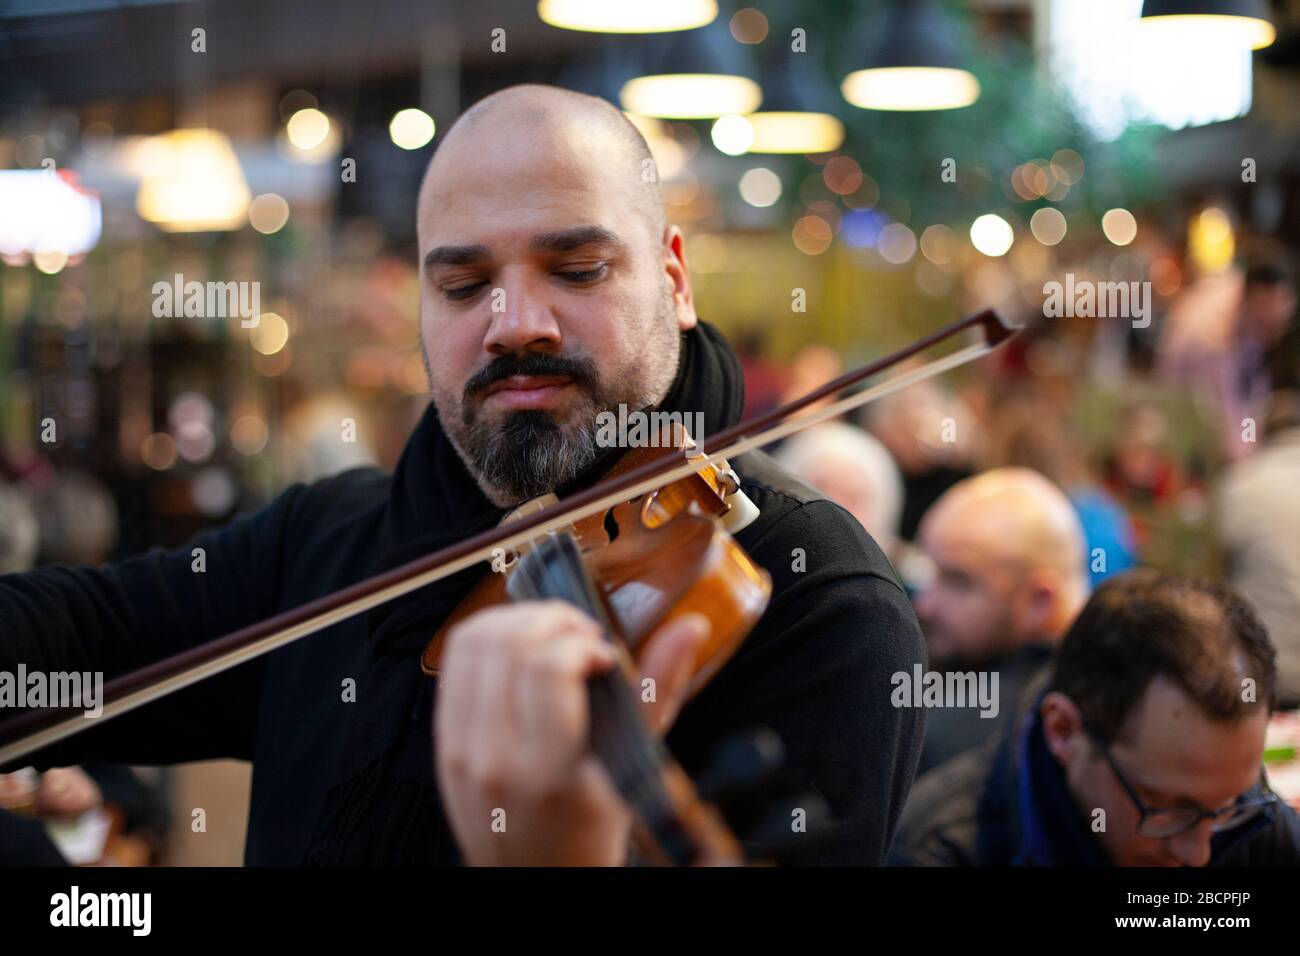 A fiddler plays to a restaurant audience in the Central Market Hall, Budapest, Hungary in winter Stock Photo